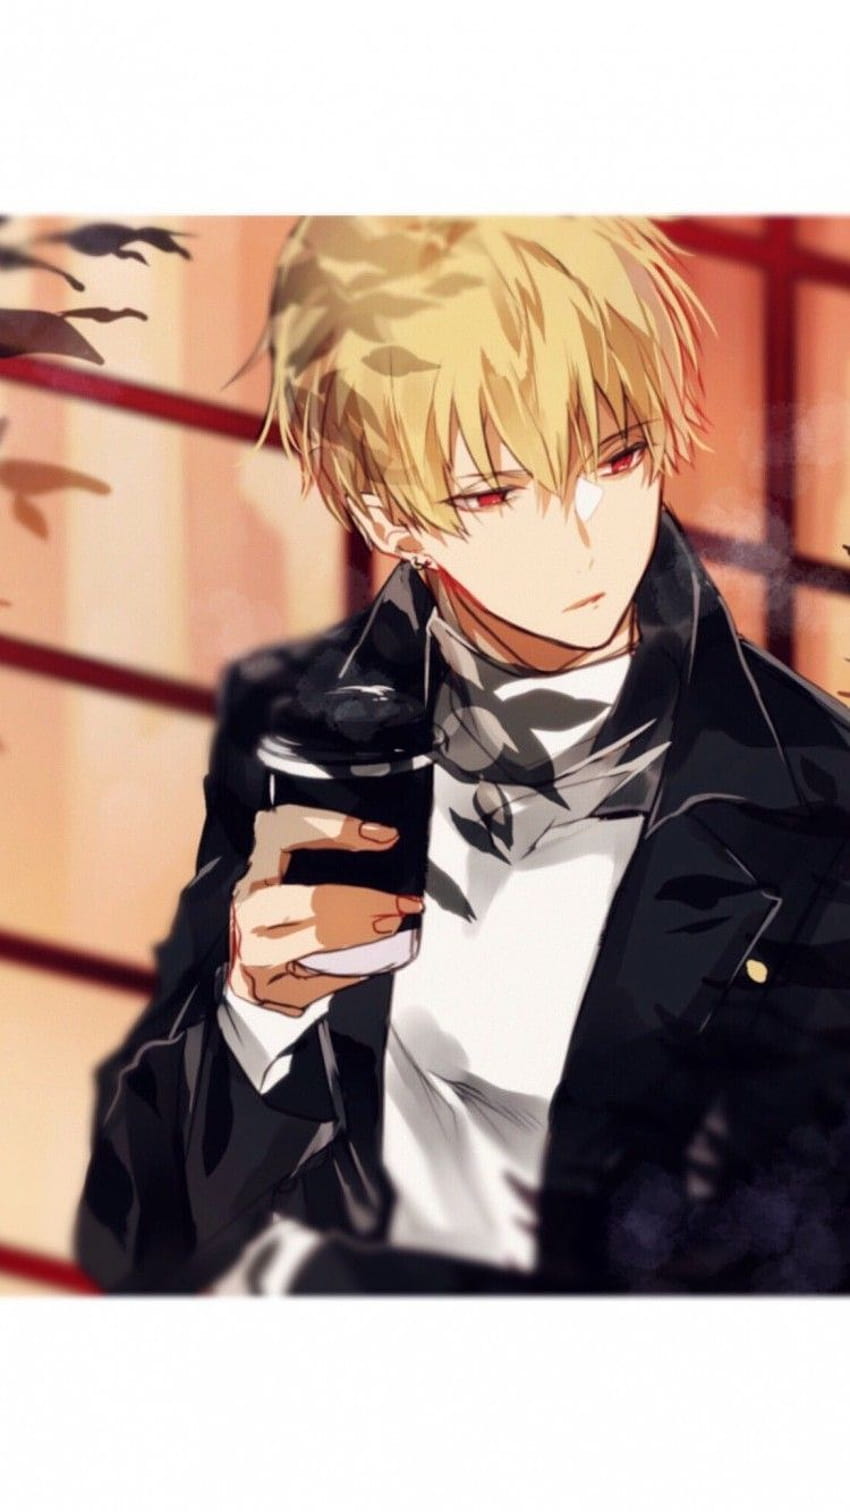 750x1334 Gilgamesh, Fate Stay Night, Anime Boy, Red Eyes, Blonde, Coffee for iPhone 7, iPhone 6, blonde anime boy HD phone wallpaper